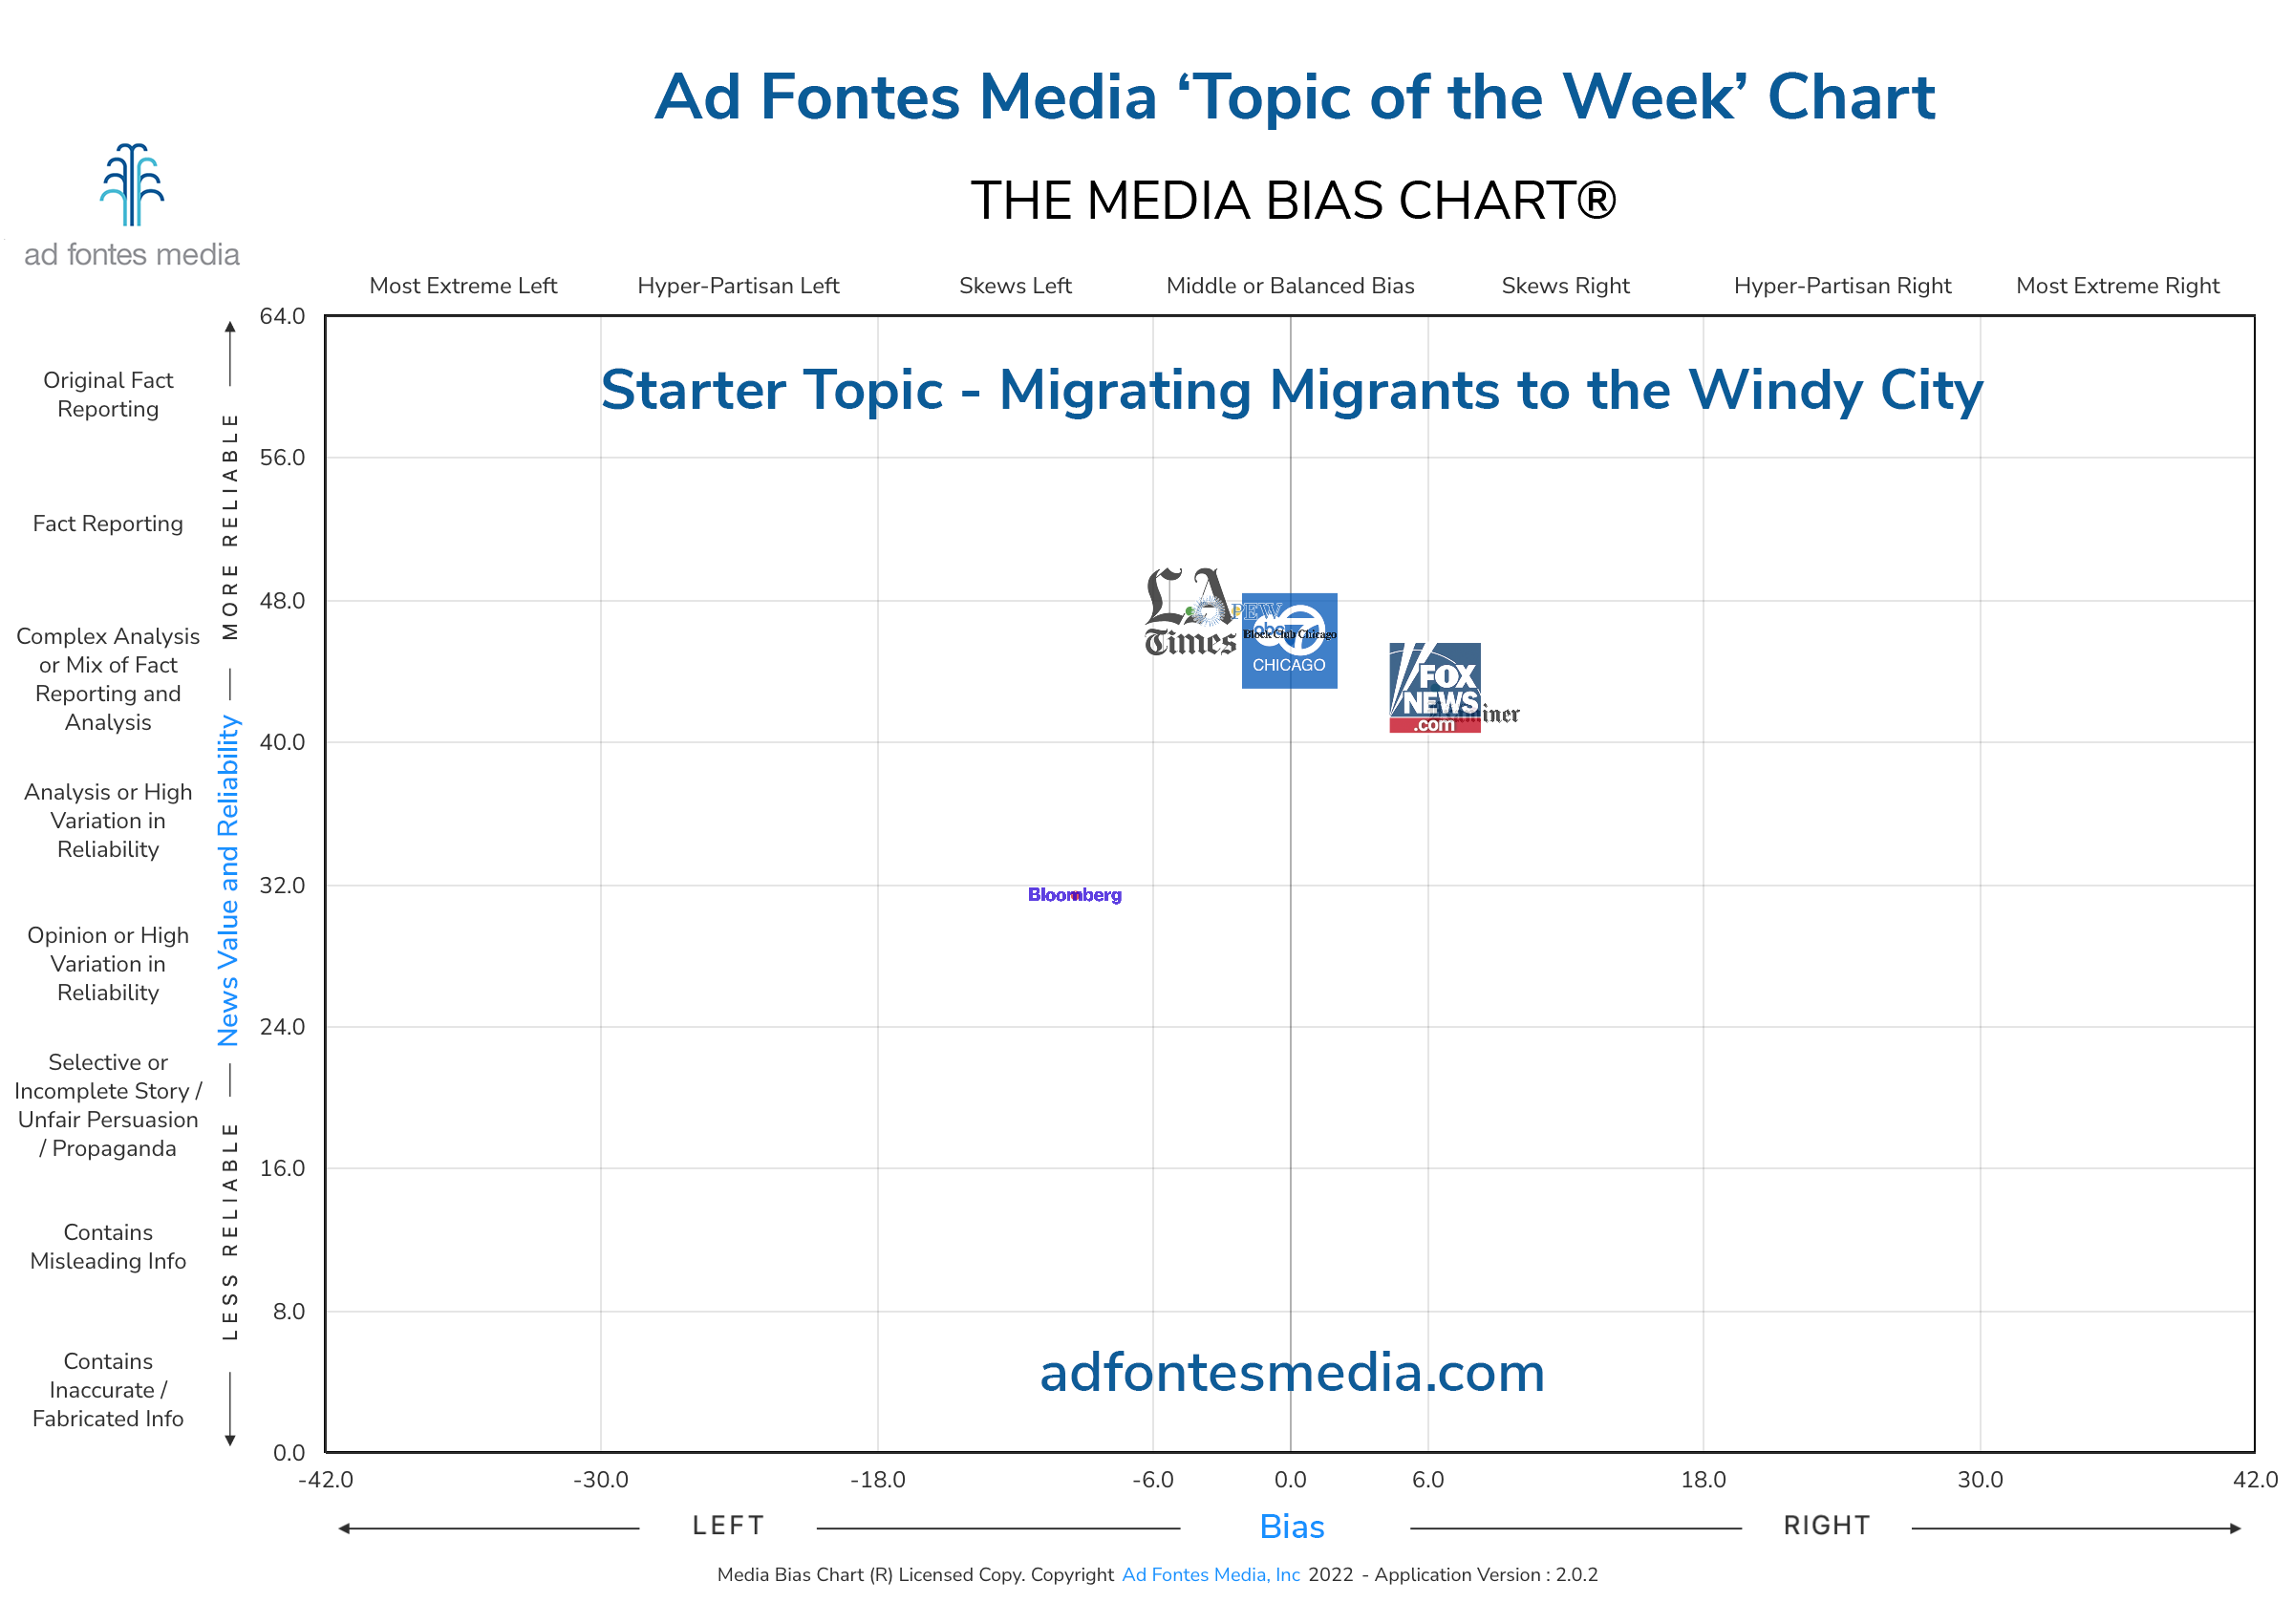 Scores of the Migrating Migrants to the Windy City articles on the chart